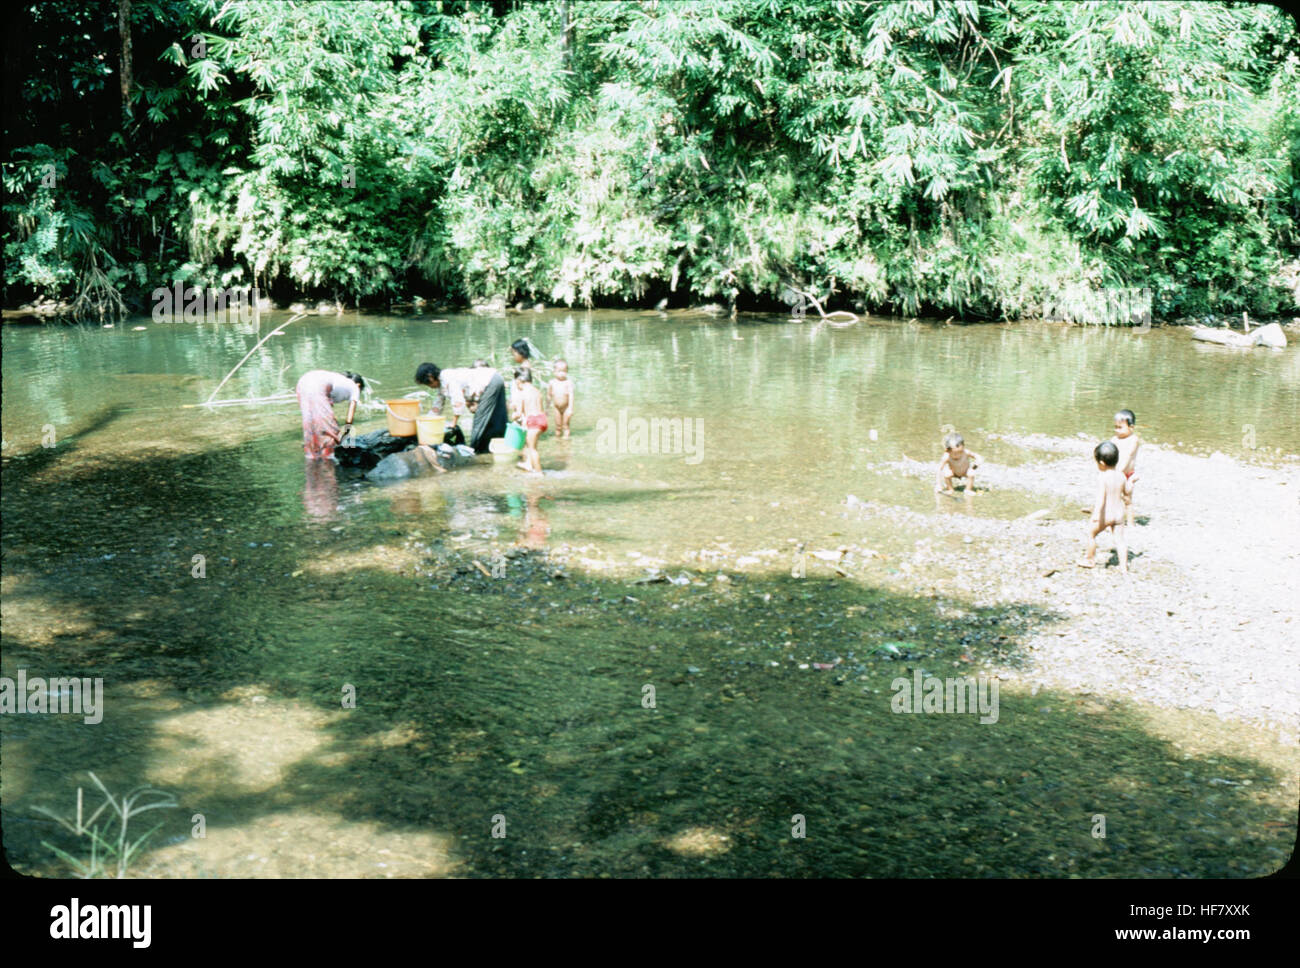 Dayak people washing and bathing in the river near their longhouses; Kuching area, Sarawak, Malaysia.  People seemed to be happy, though shy. Stock Photo